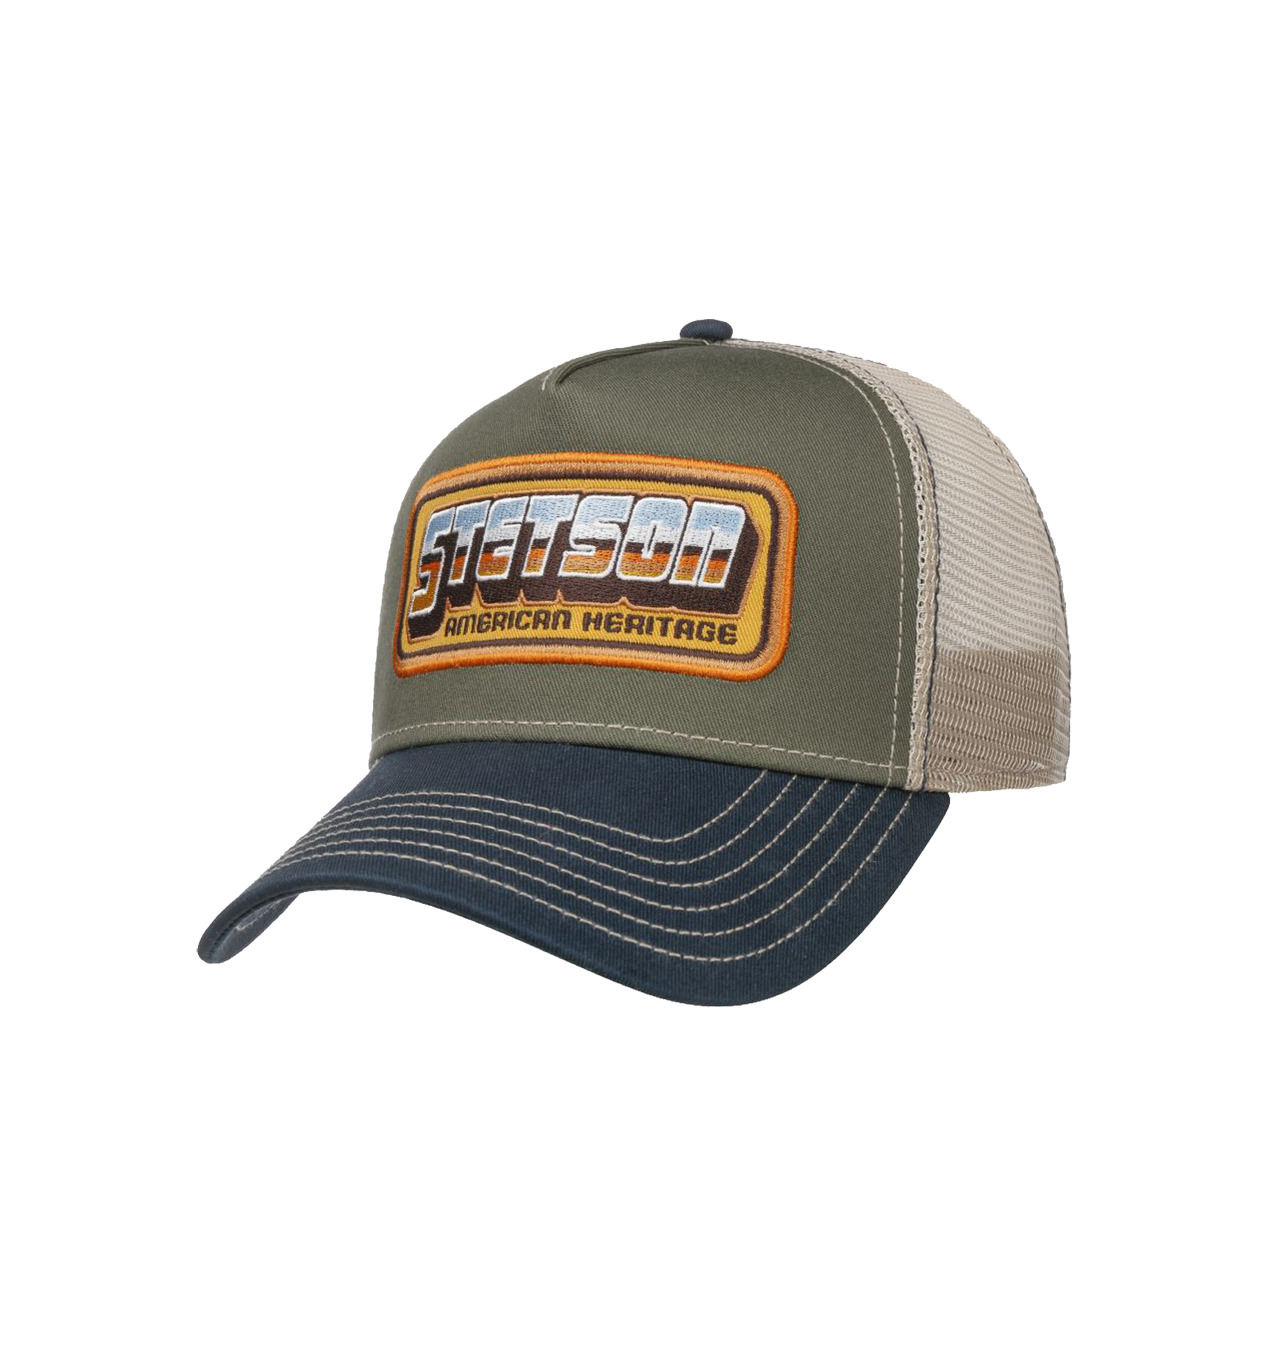 Stetson---Kids-American-Heritage-Patch-Trucker-Cap---Olive-1